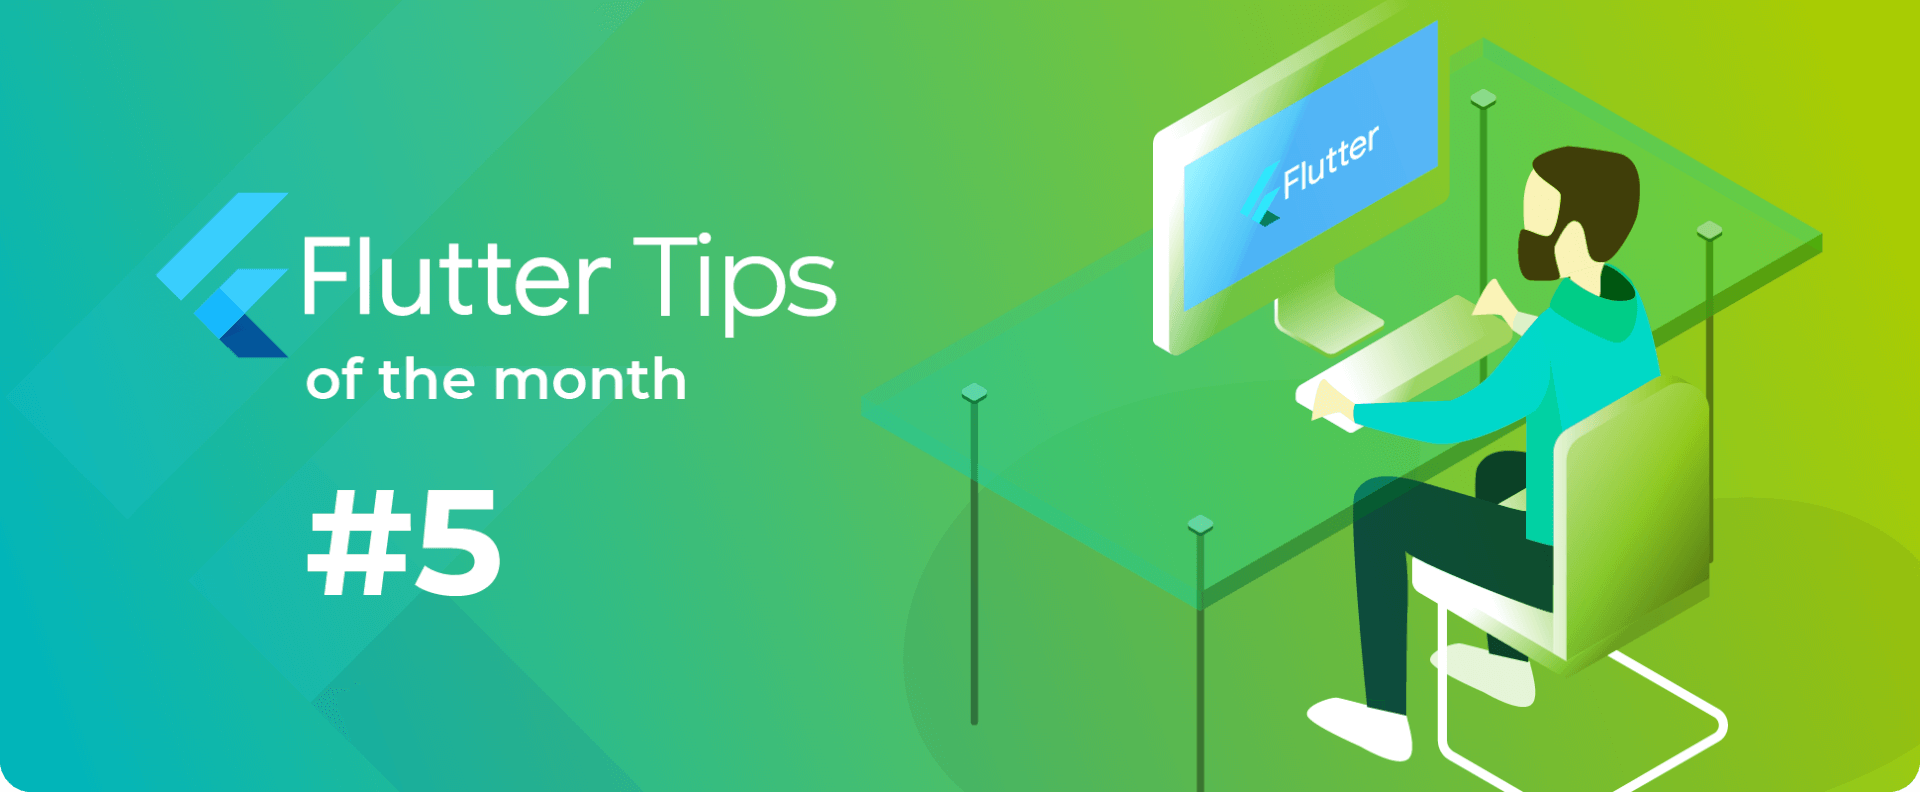 Flutter Tips of the month #5